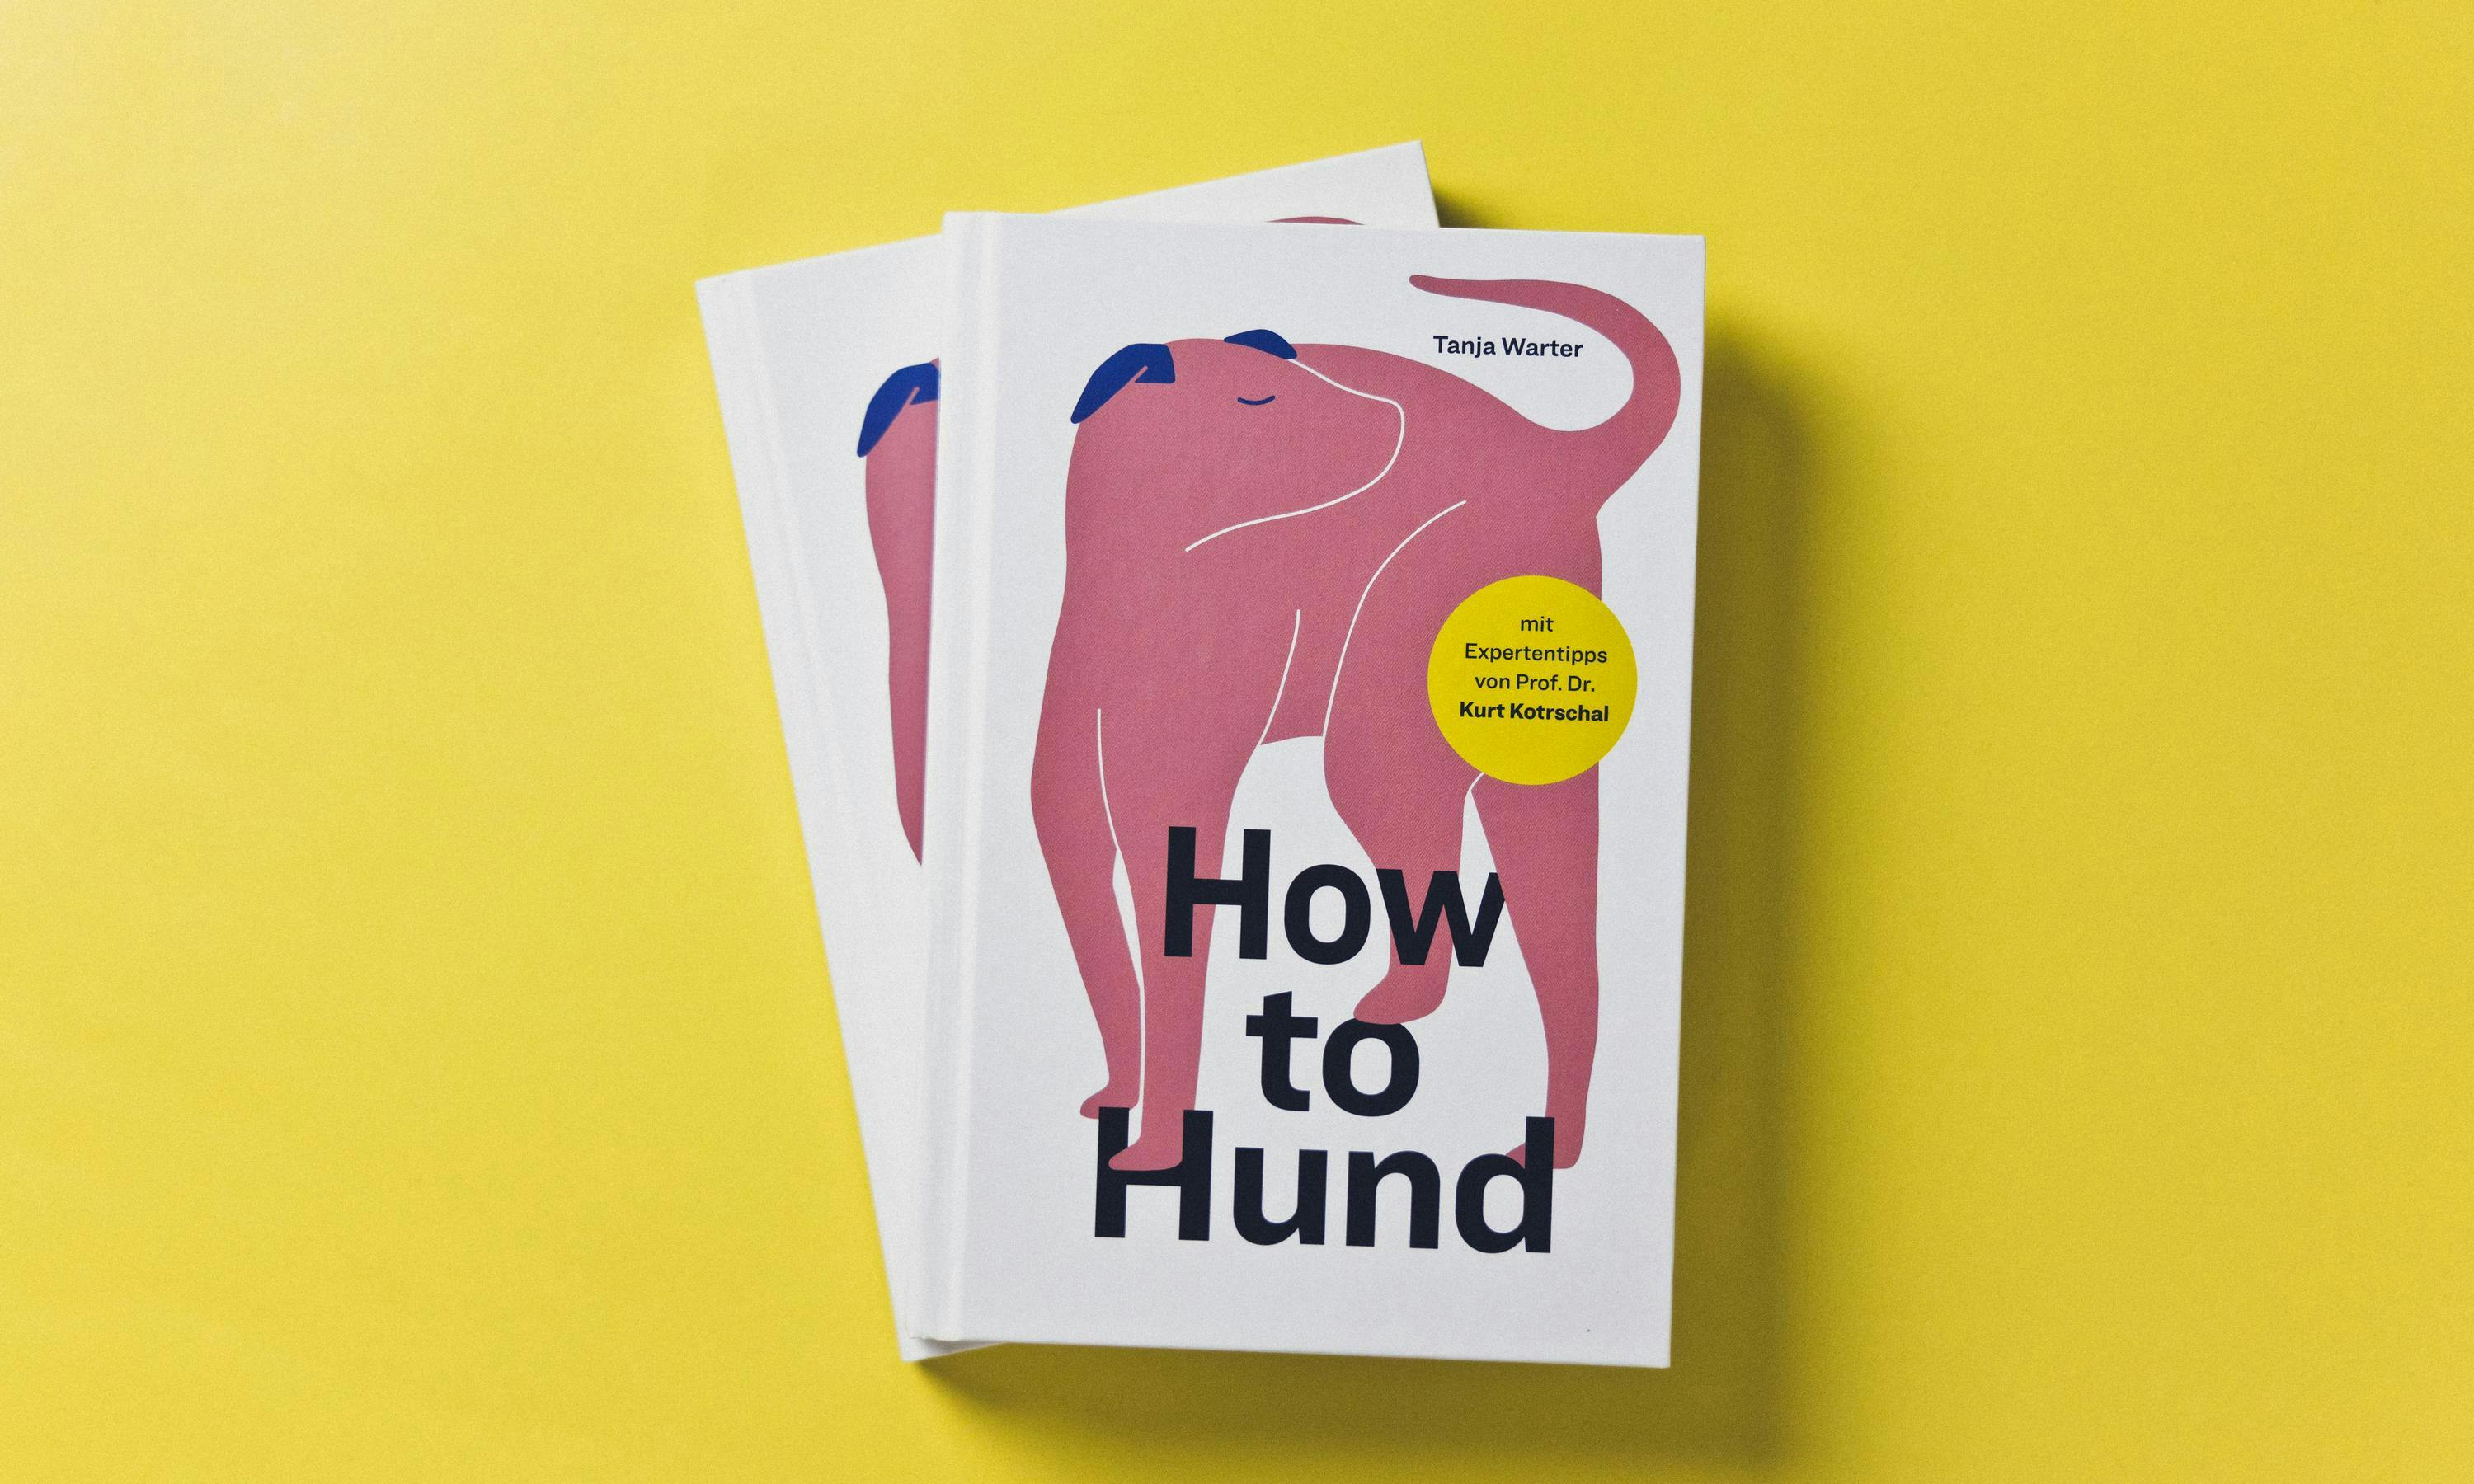 How to Hund - Tanja Warter - Cover © Patricia Keckeis